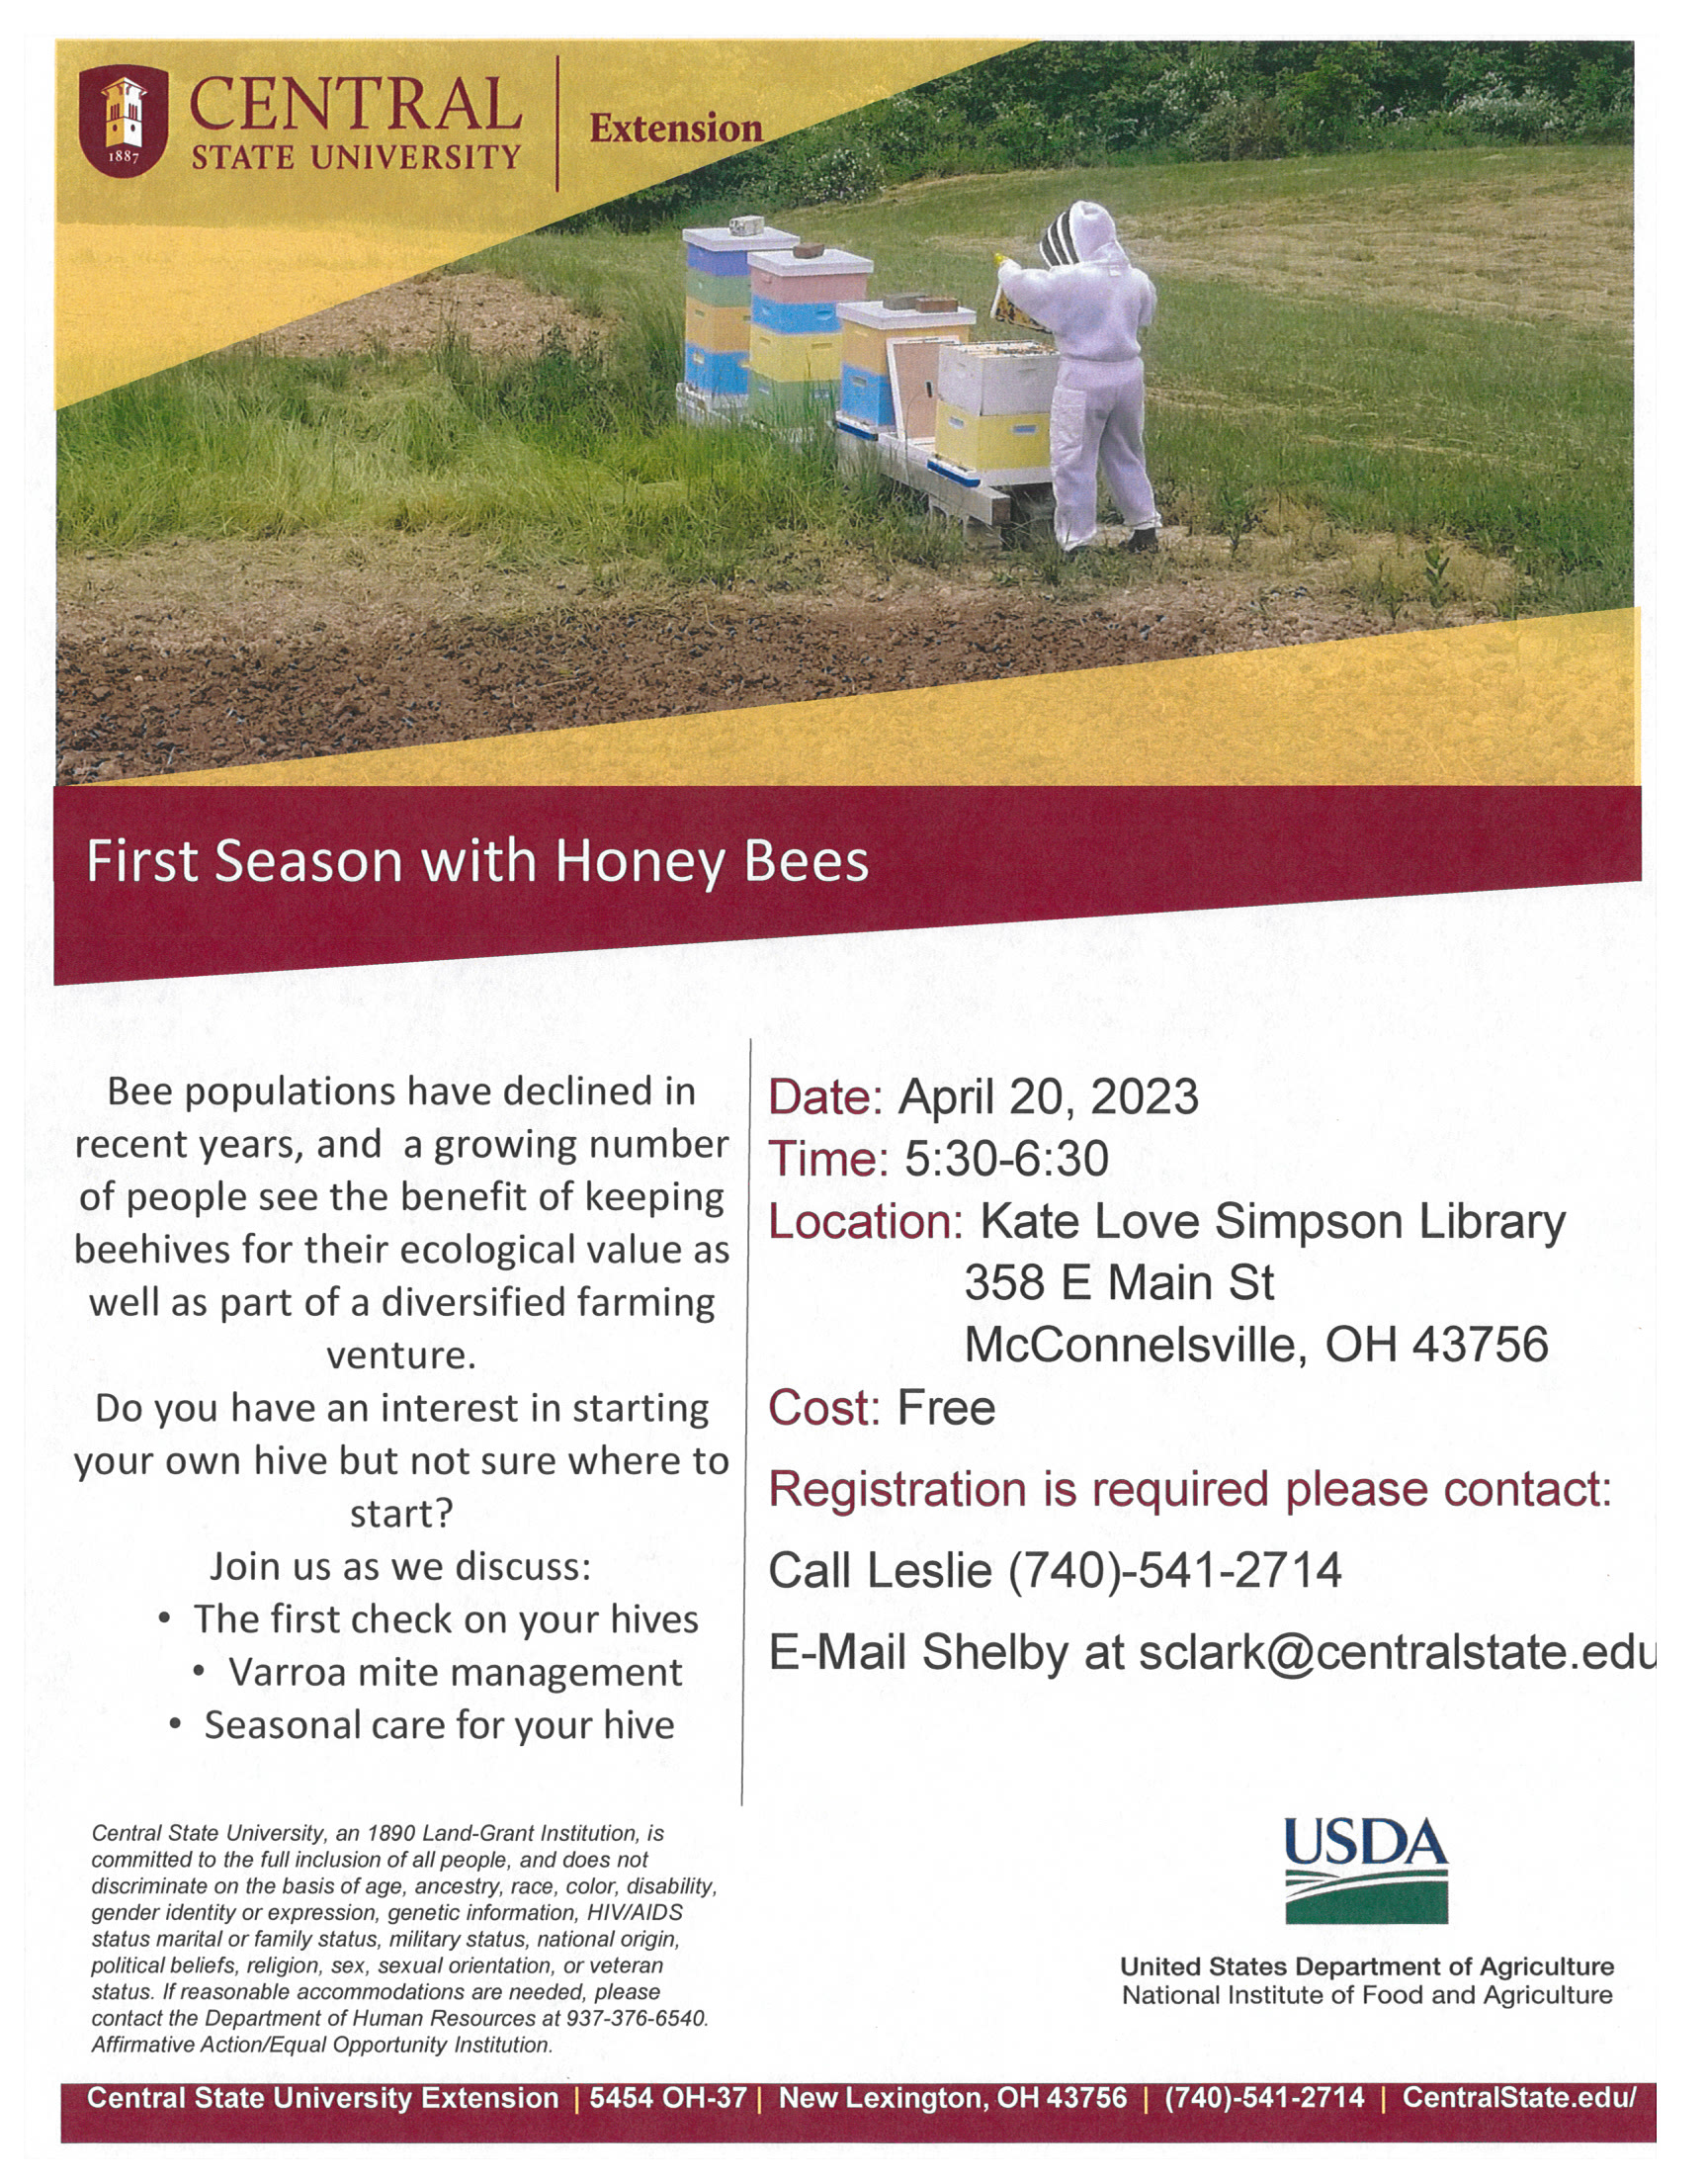 A flyer for a program that is about bees and beekeeping